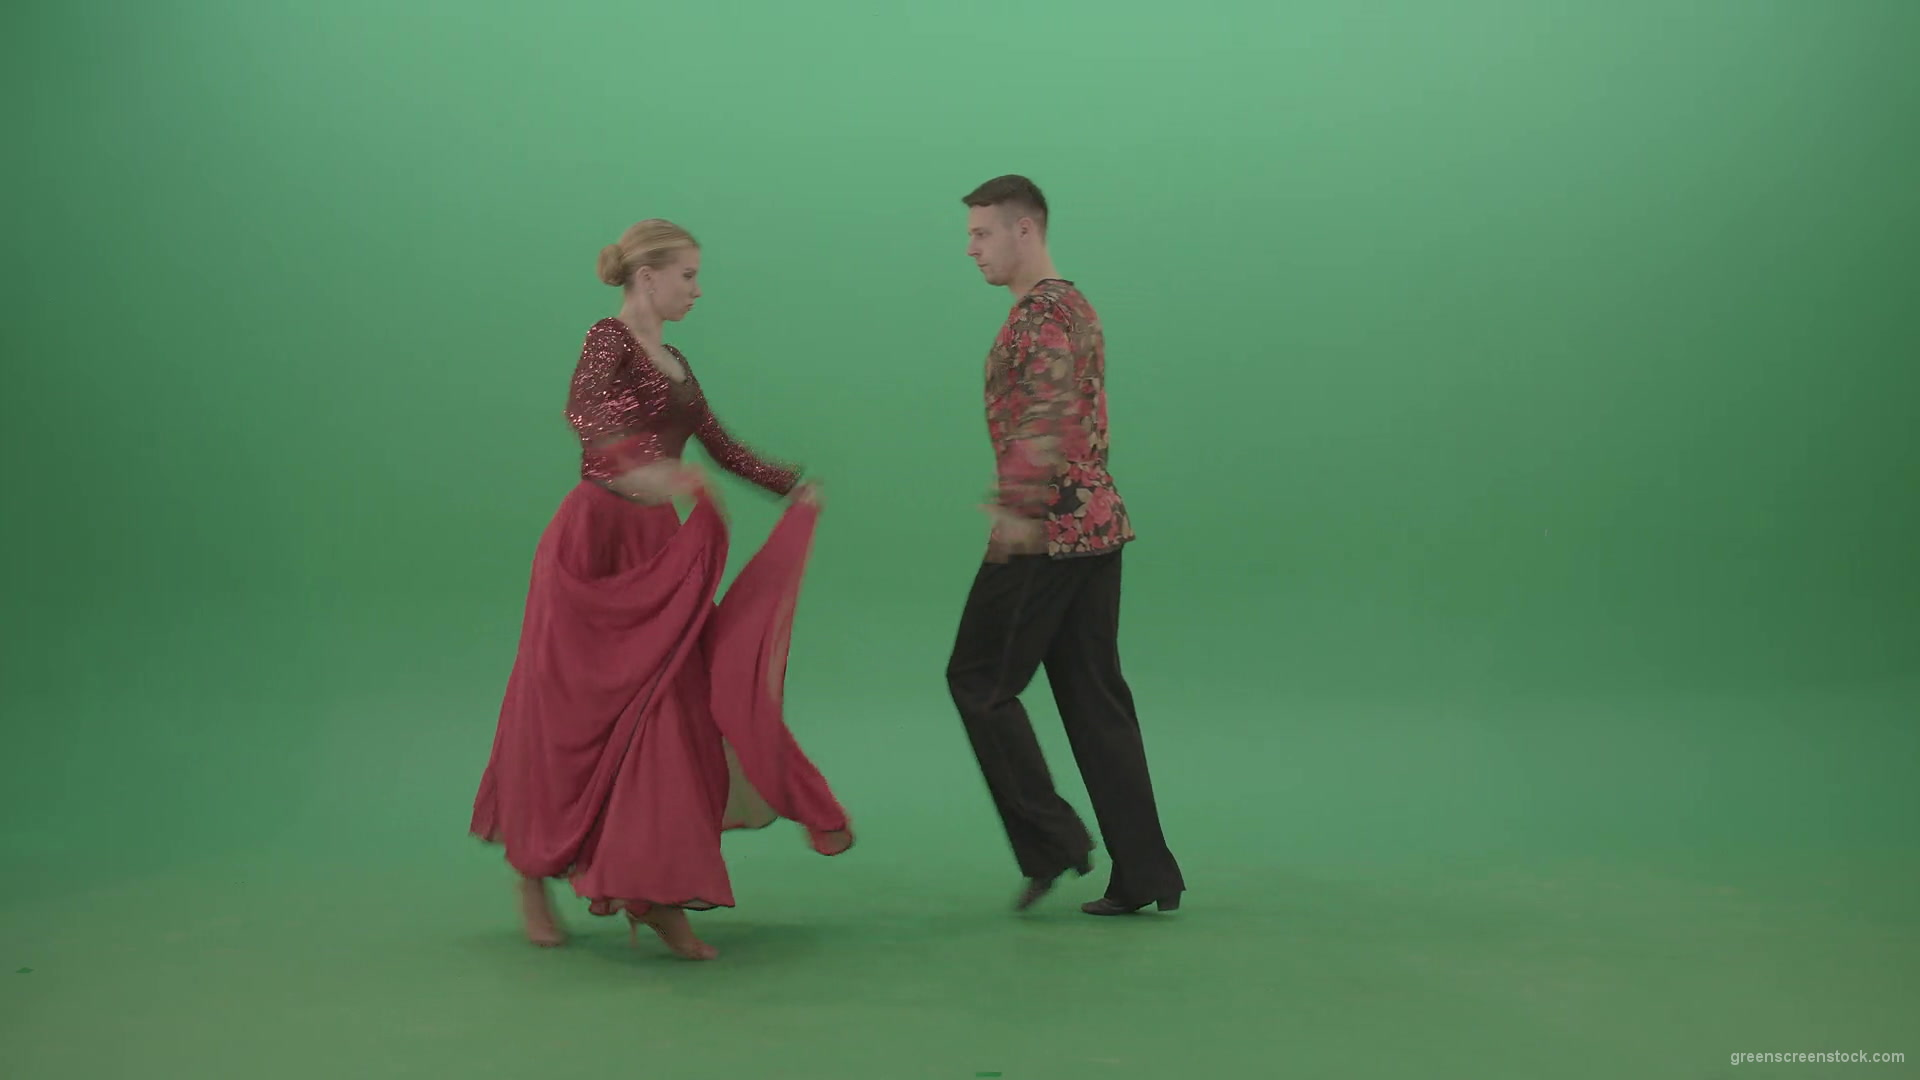 Passion-Couple-dancing-Rumba-Ballroom-dance-and-clapping-in-hands-isolated-on-green-screen-4K-Video-Footage-1920_006 Green Screen Stock